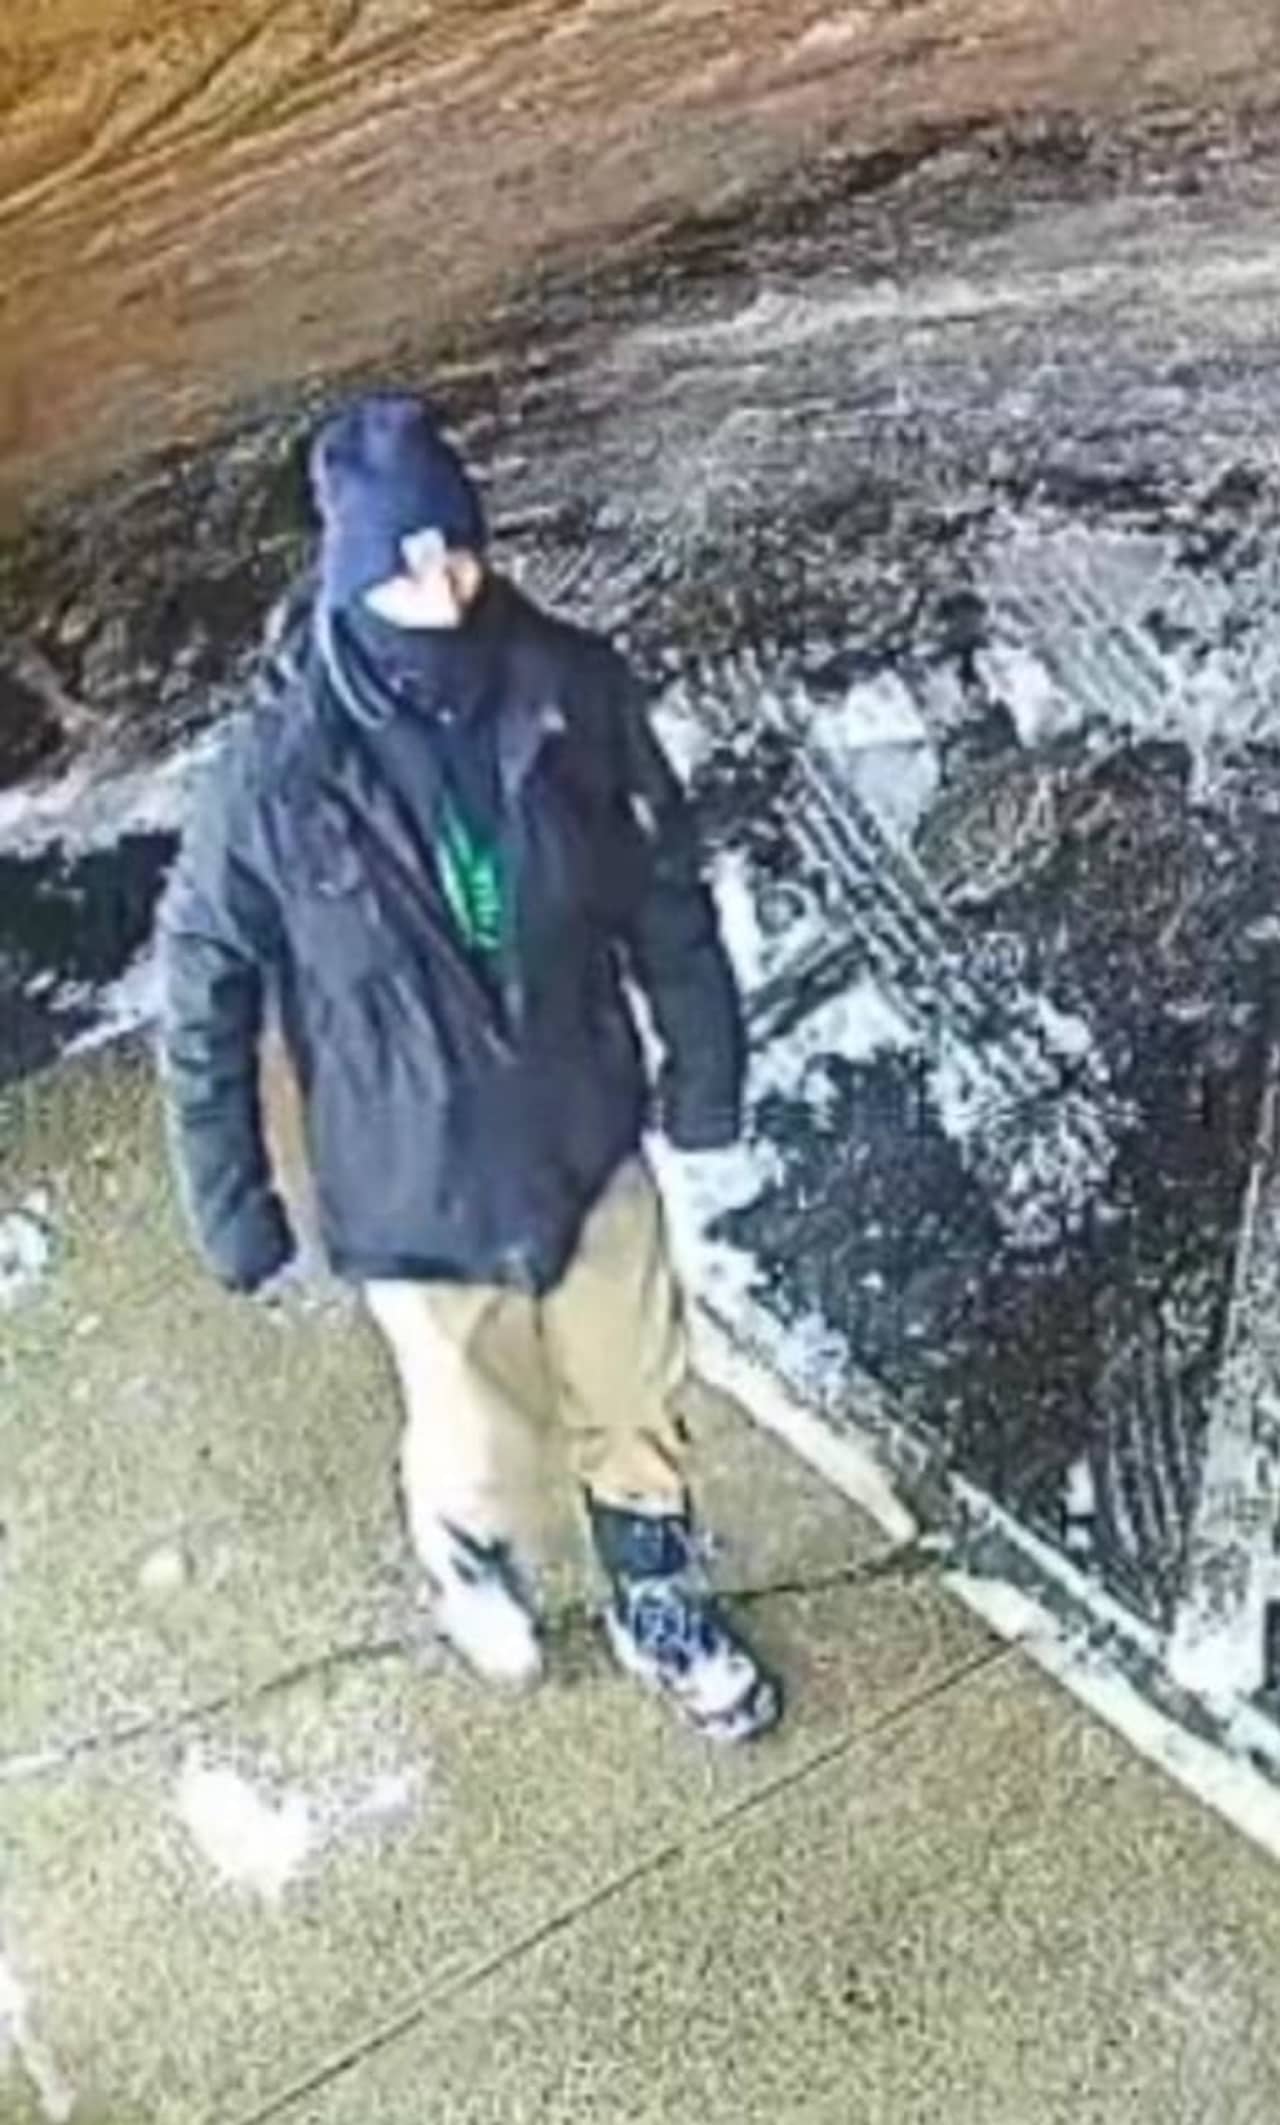 Know him? Milford Police want to know.